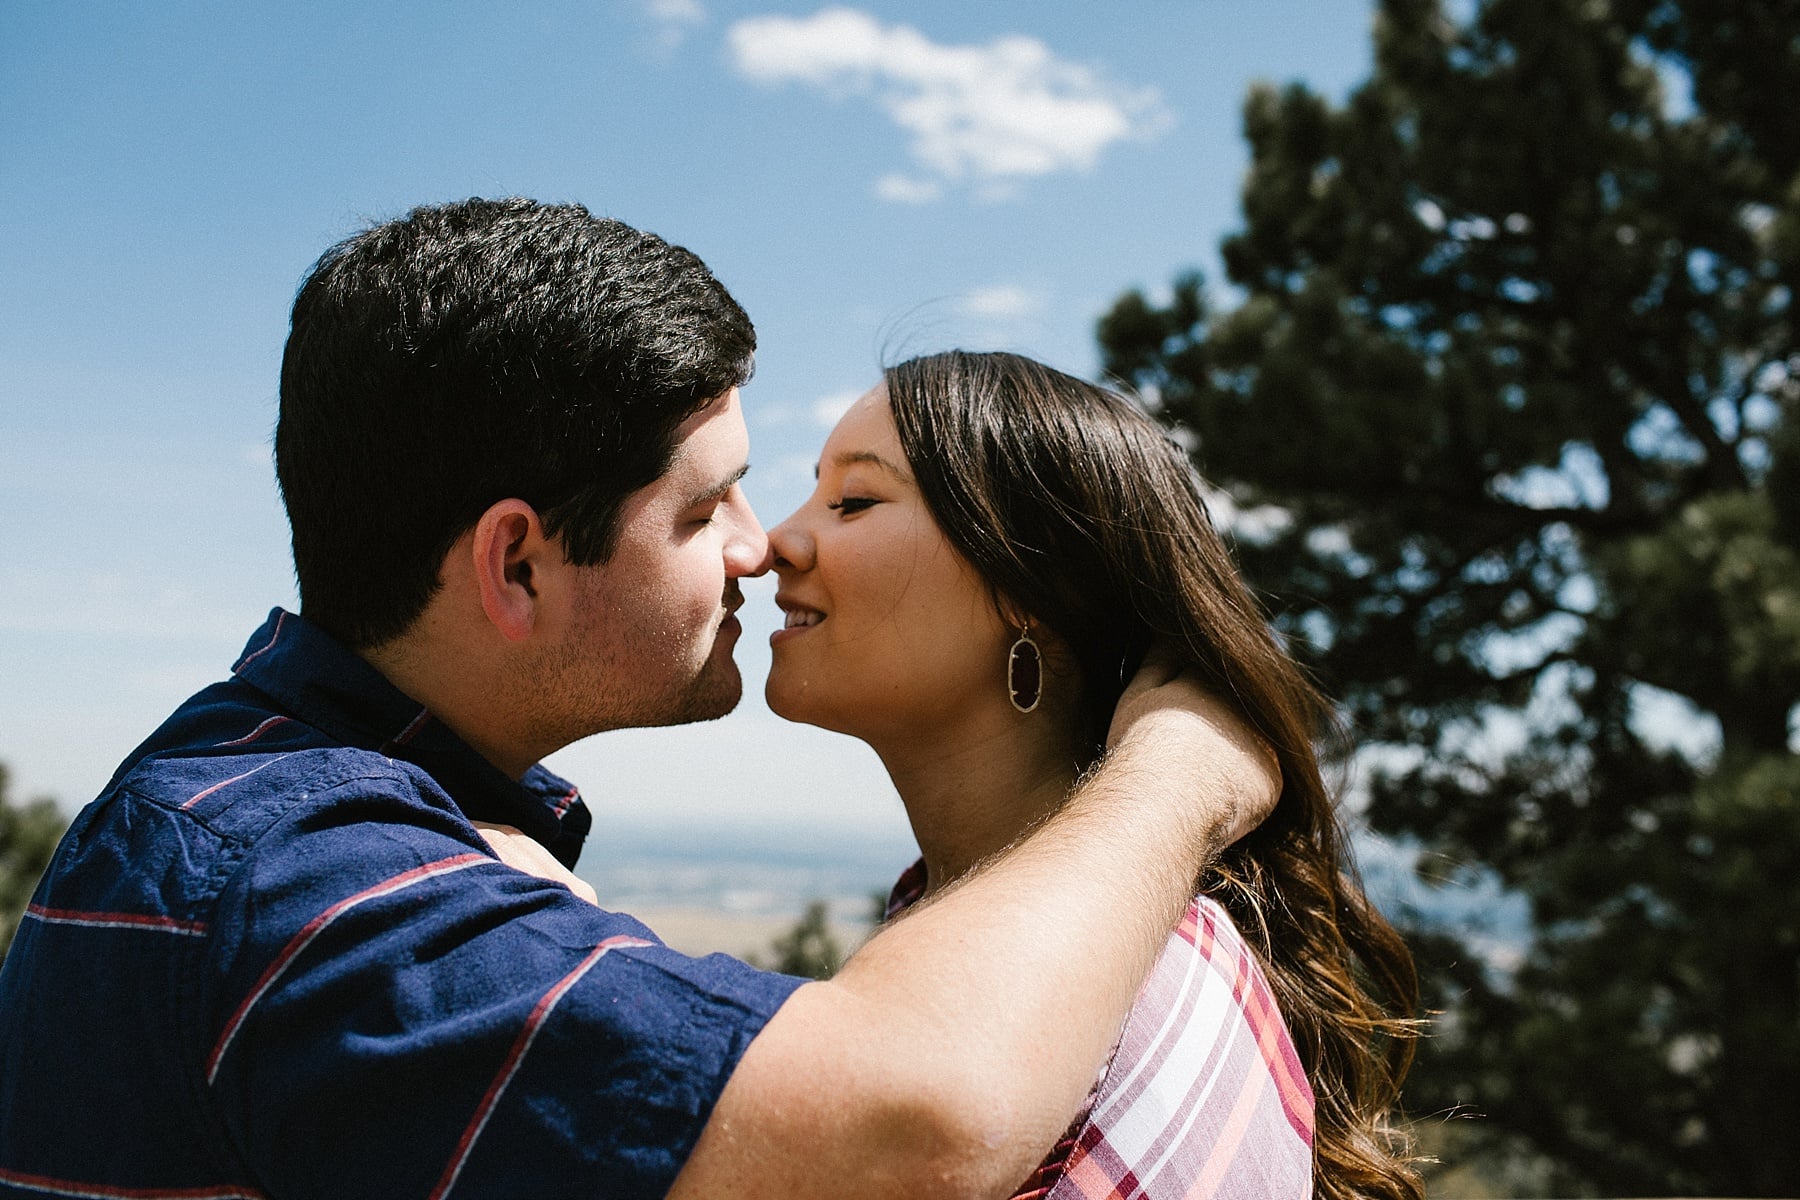 Lookout mountain proposal photography